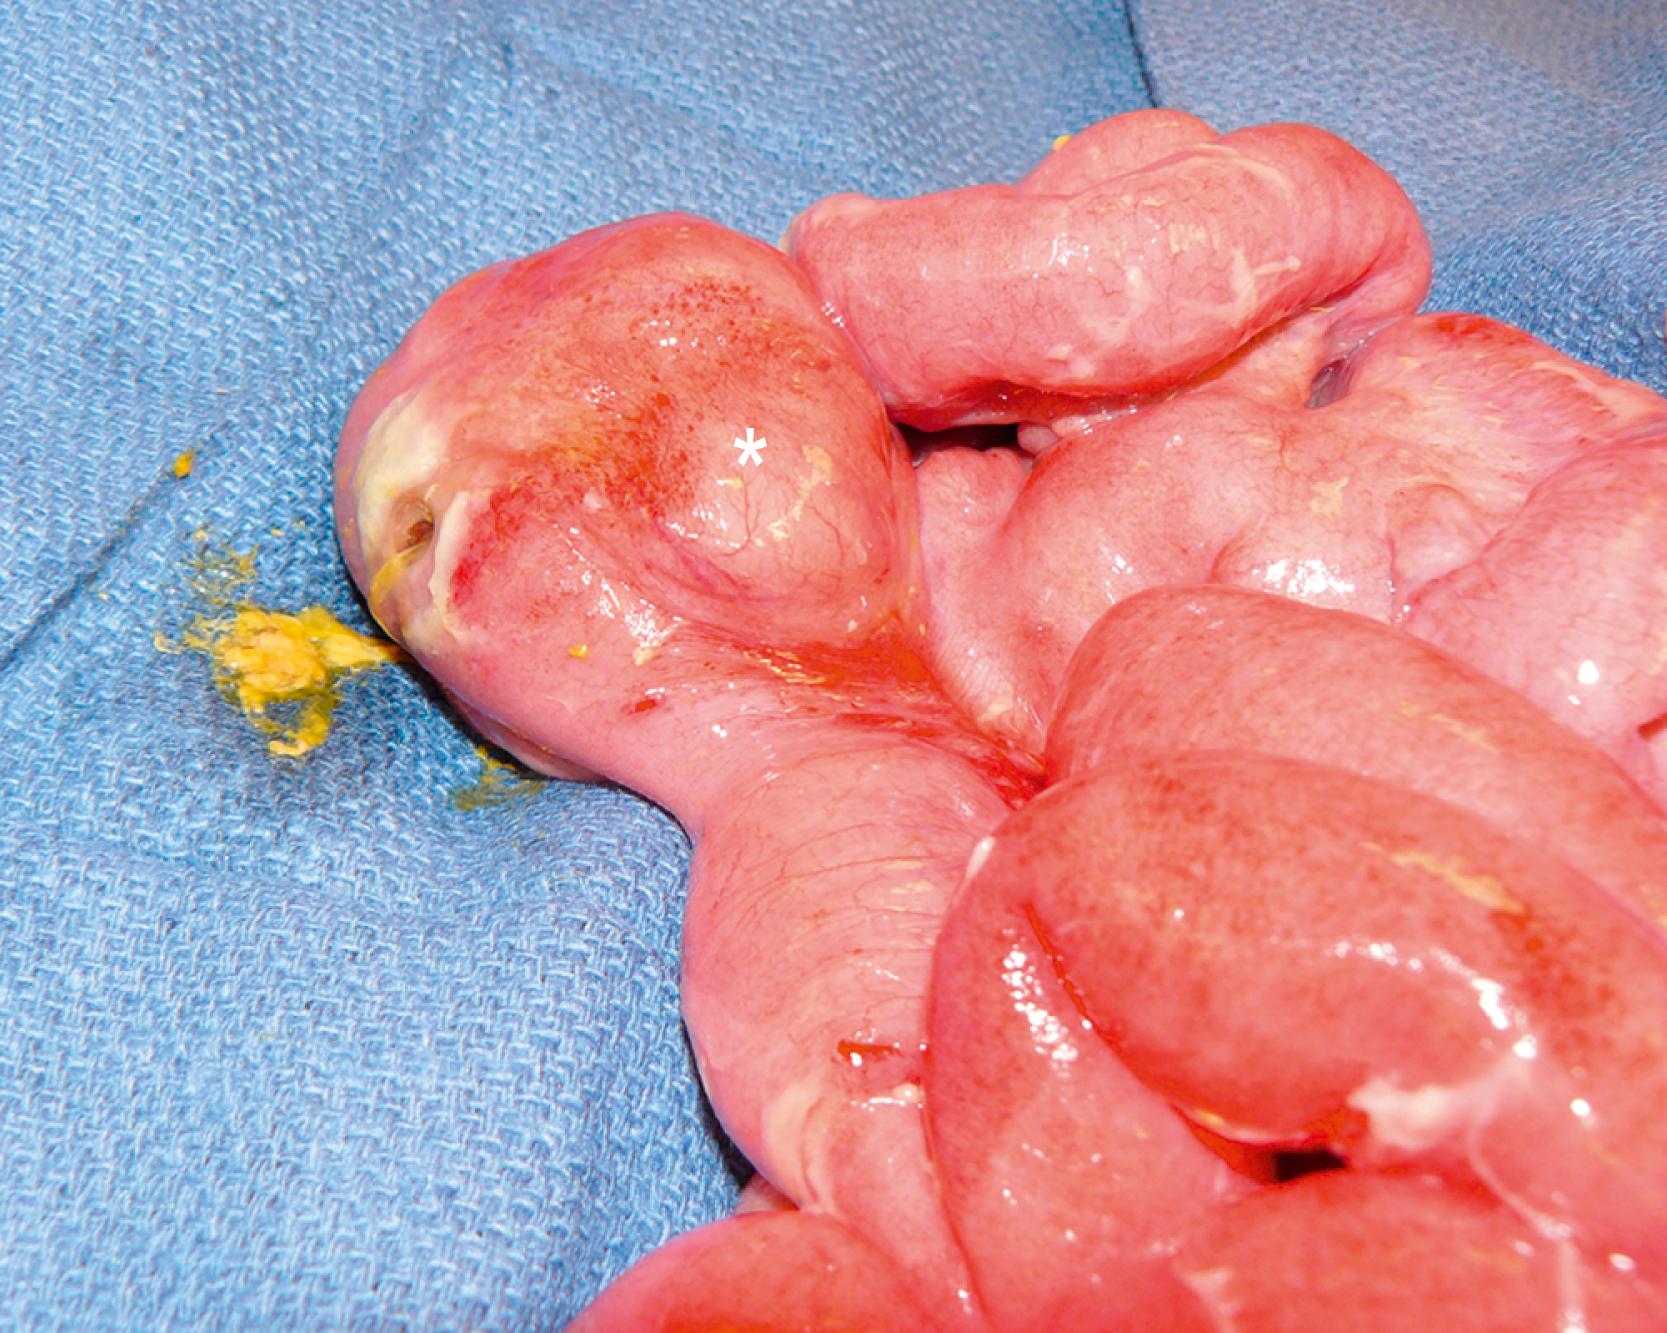 Fig. 39.5, This infant presented with abdominal distention and free air. Laparotomy was performed, and this perforation on the antimesenteric side of the distal small bowel was seen. The perforation occurred due to the duplication cyst located on the mesenteric border (asterisk). This patient underwent segmental small bowel resection and recovered uneventfully.